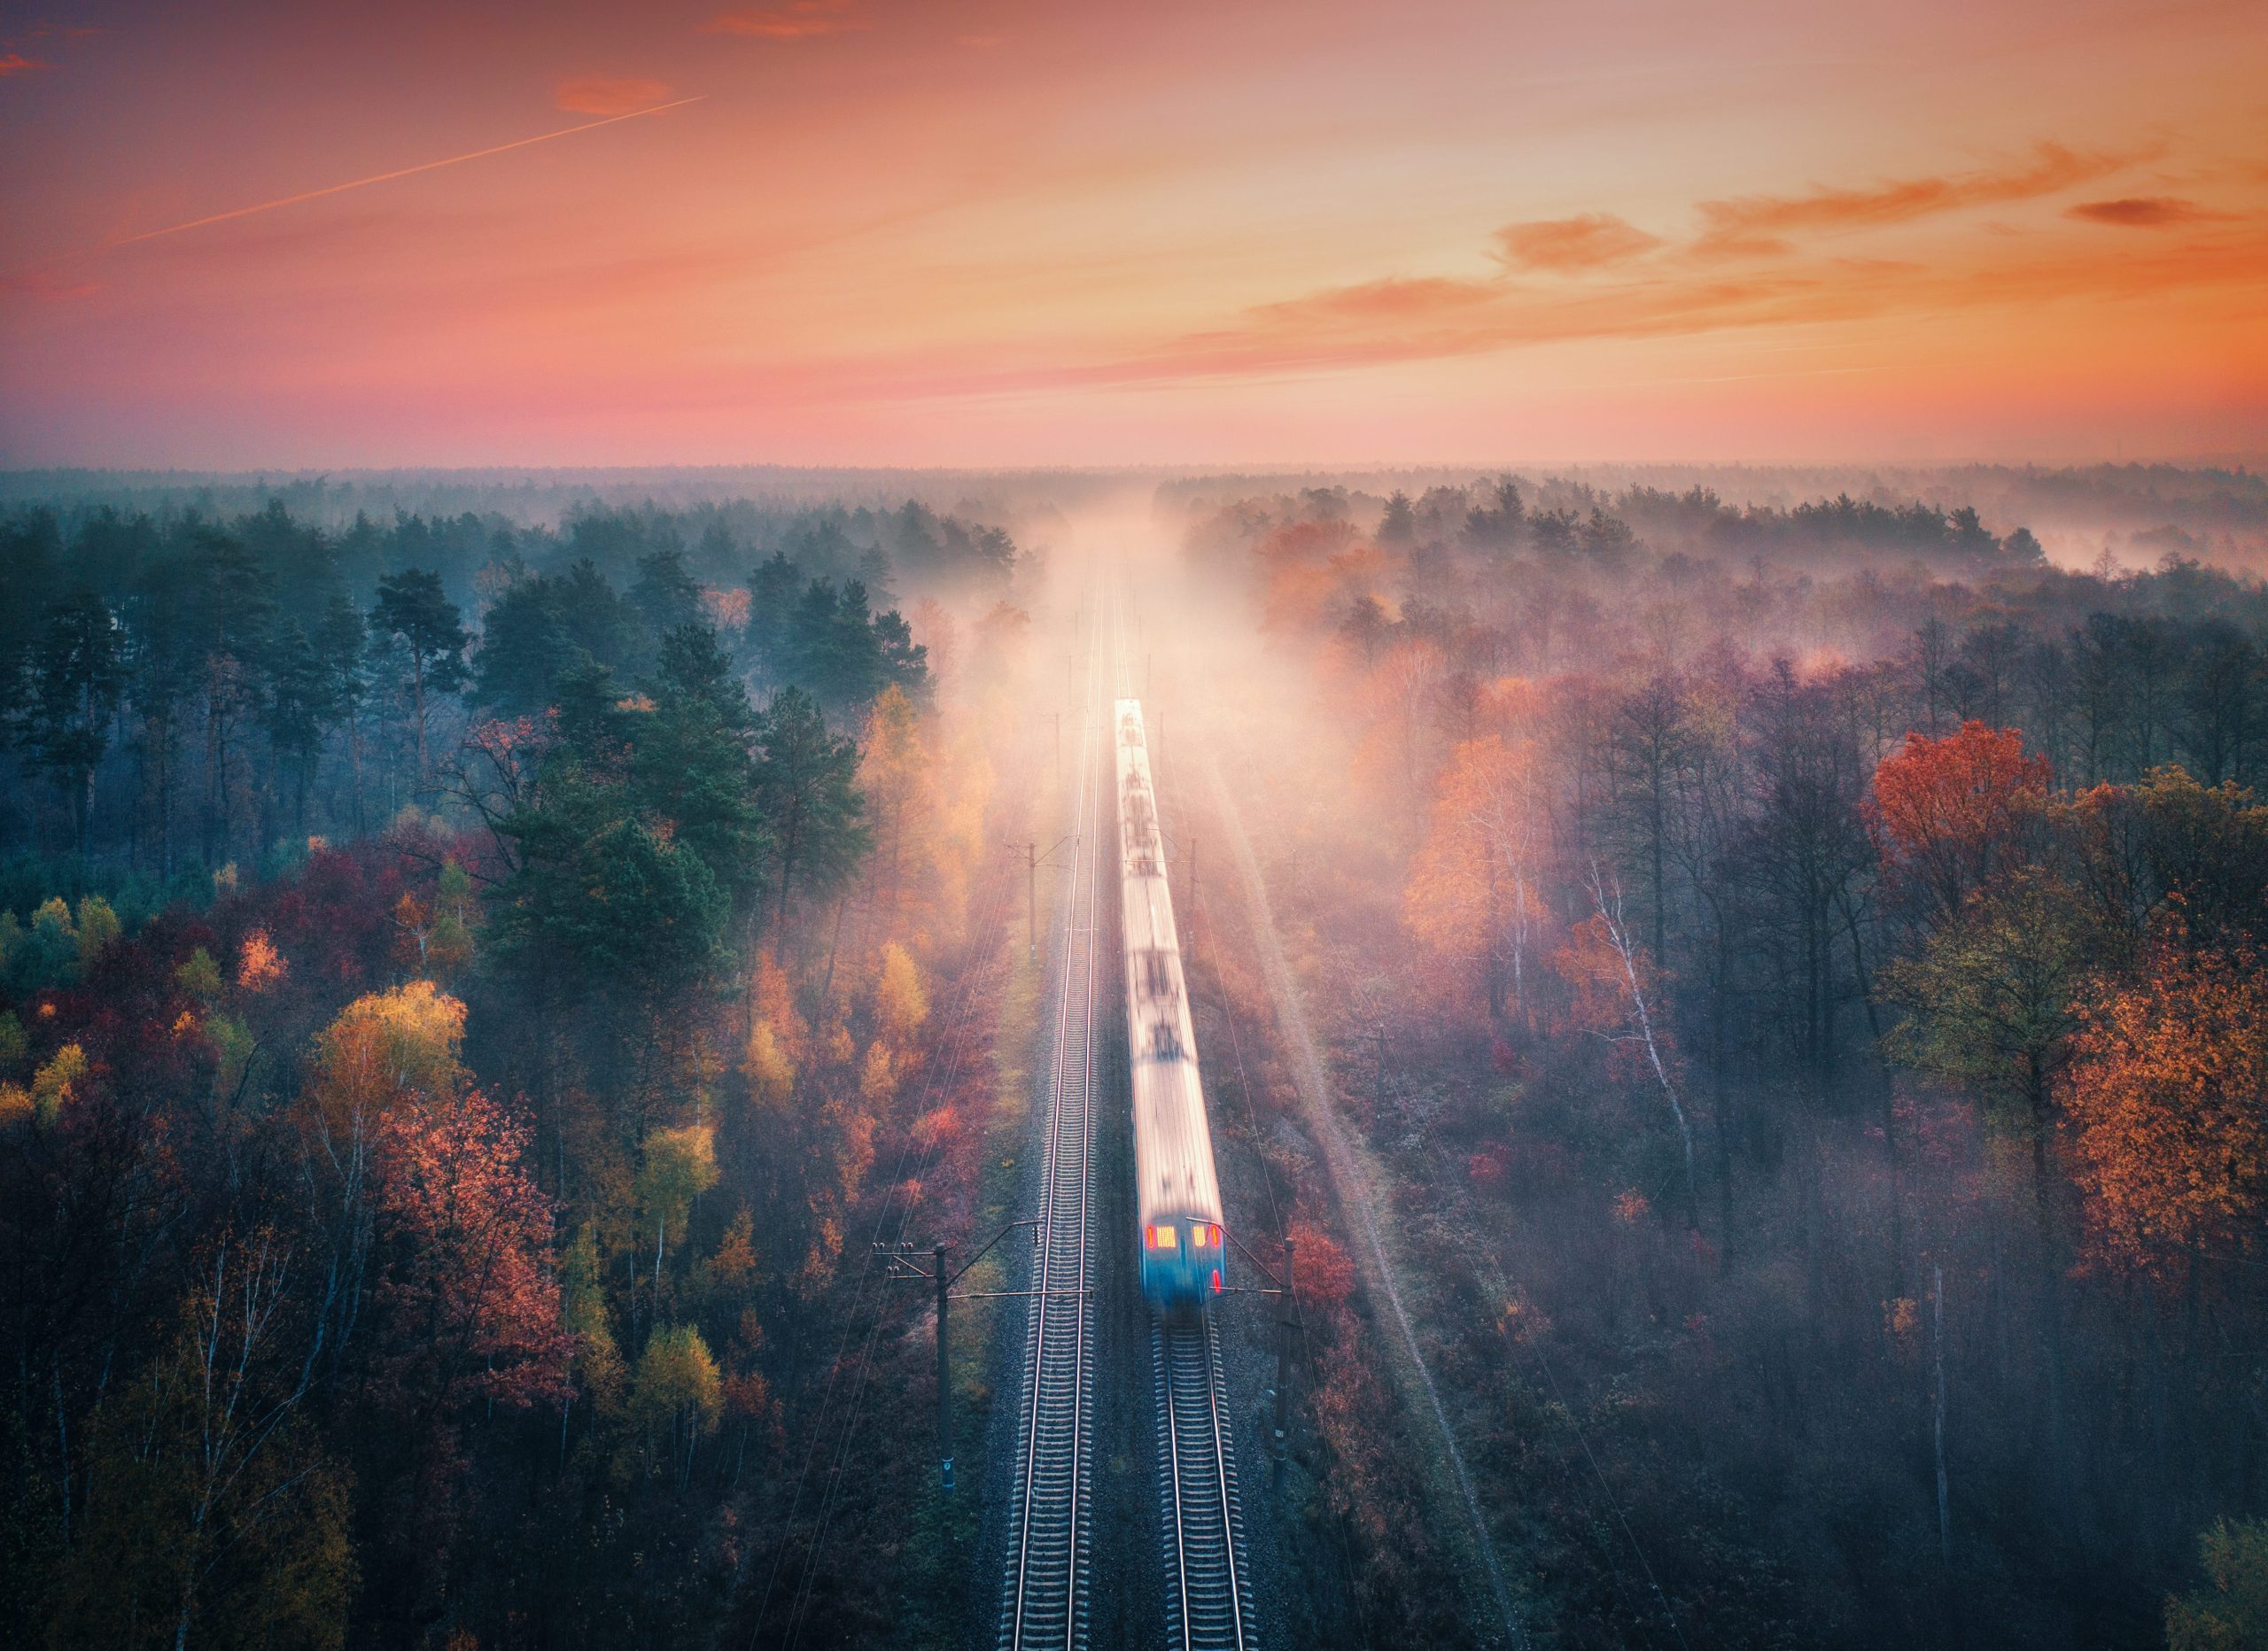 https://www.accidentinjurylawyers.claims/wp-content/uploads/2024/04/train-in-colorful-forest-in-fog-at-sunrise-in-autu-2023-11-27-05-32-20-utc-min-scaled.jpg